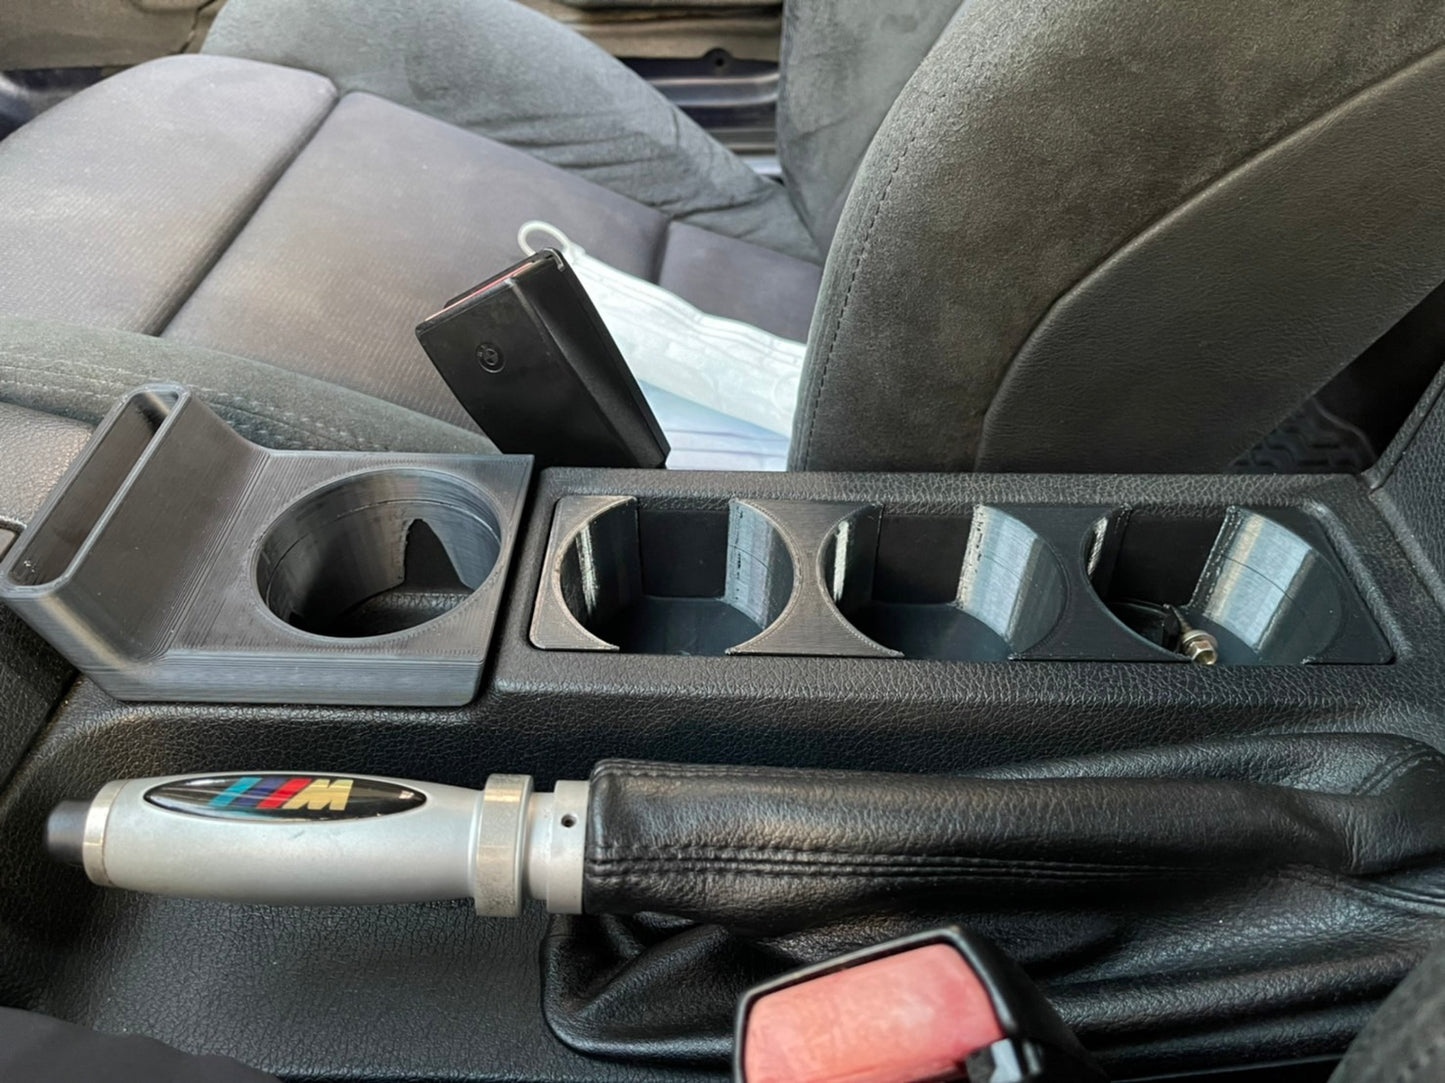 BMW E36 Ti COMPACT FRONT CUP HOLDER